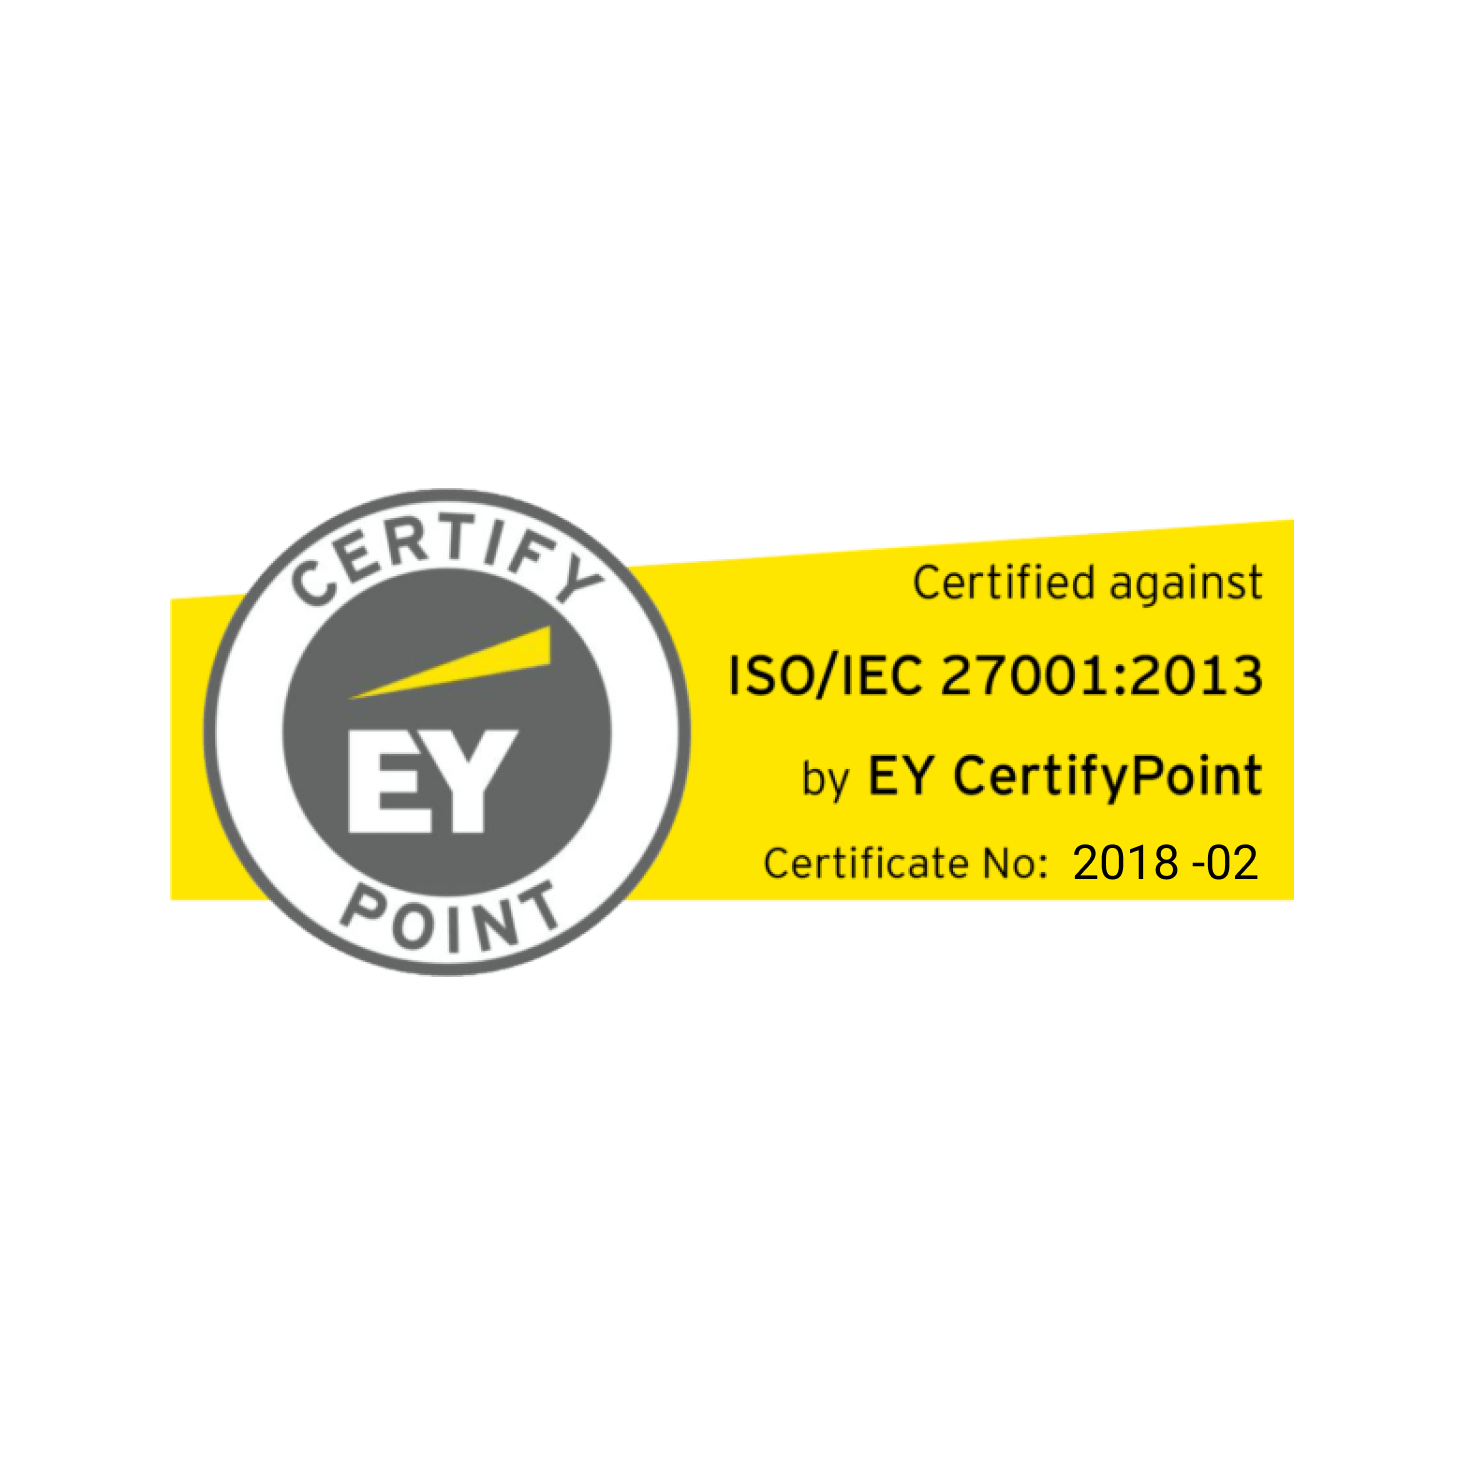 A logo that says ‘Certified on ISO/IEC 27001:2013 by EY CertifyPoint’ with certificate no. 2018 -020.